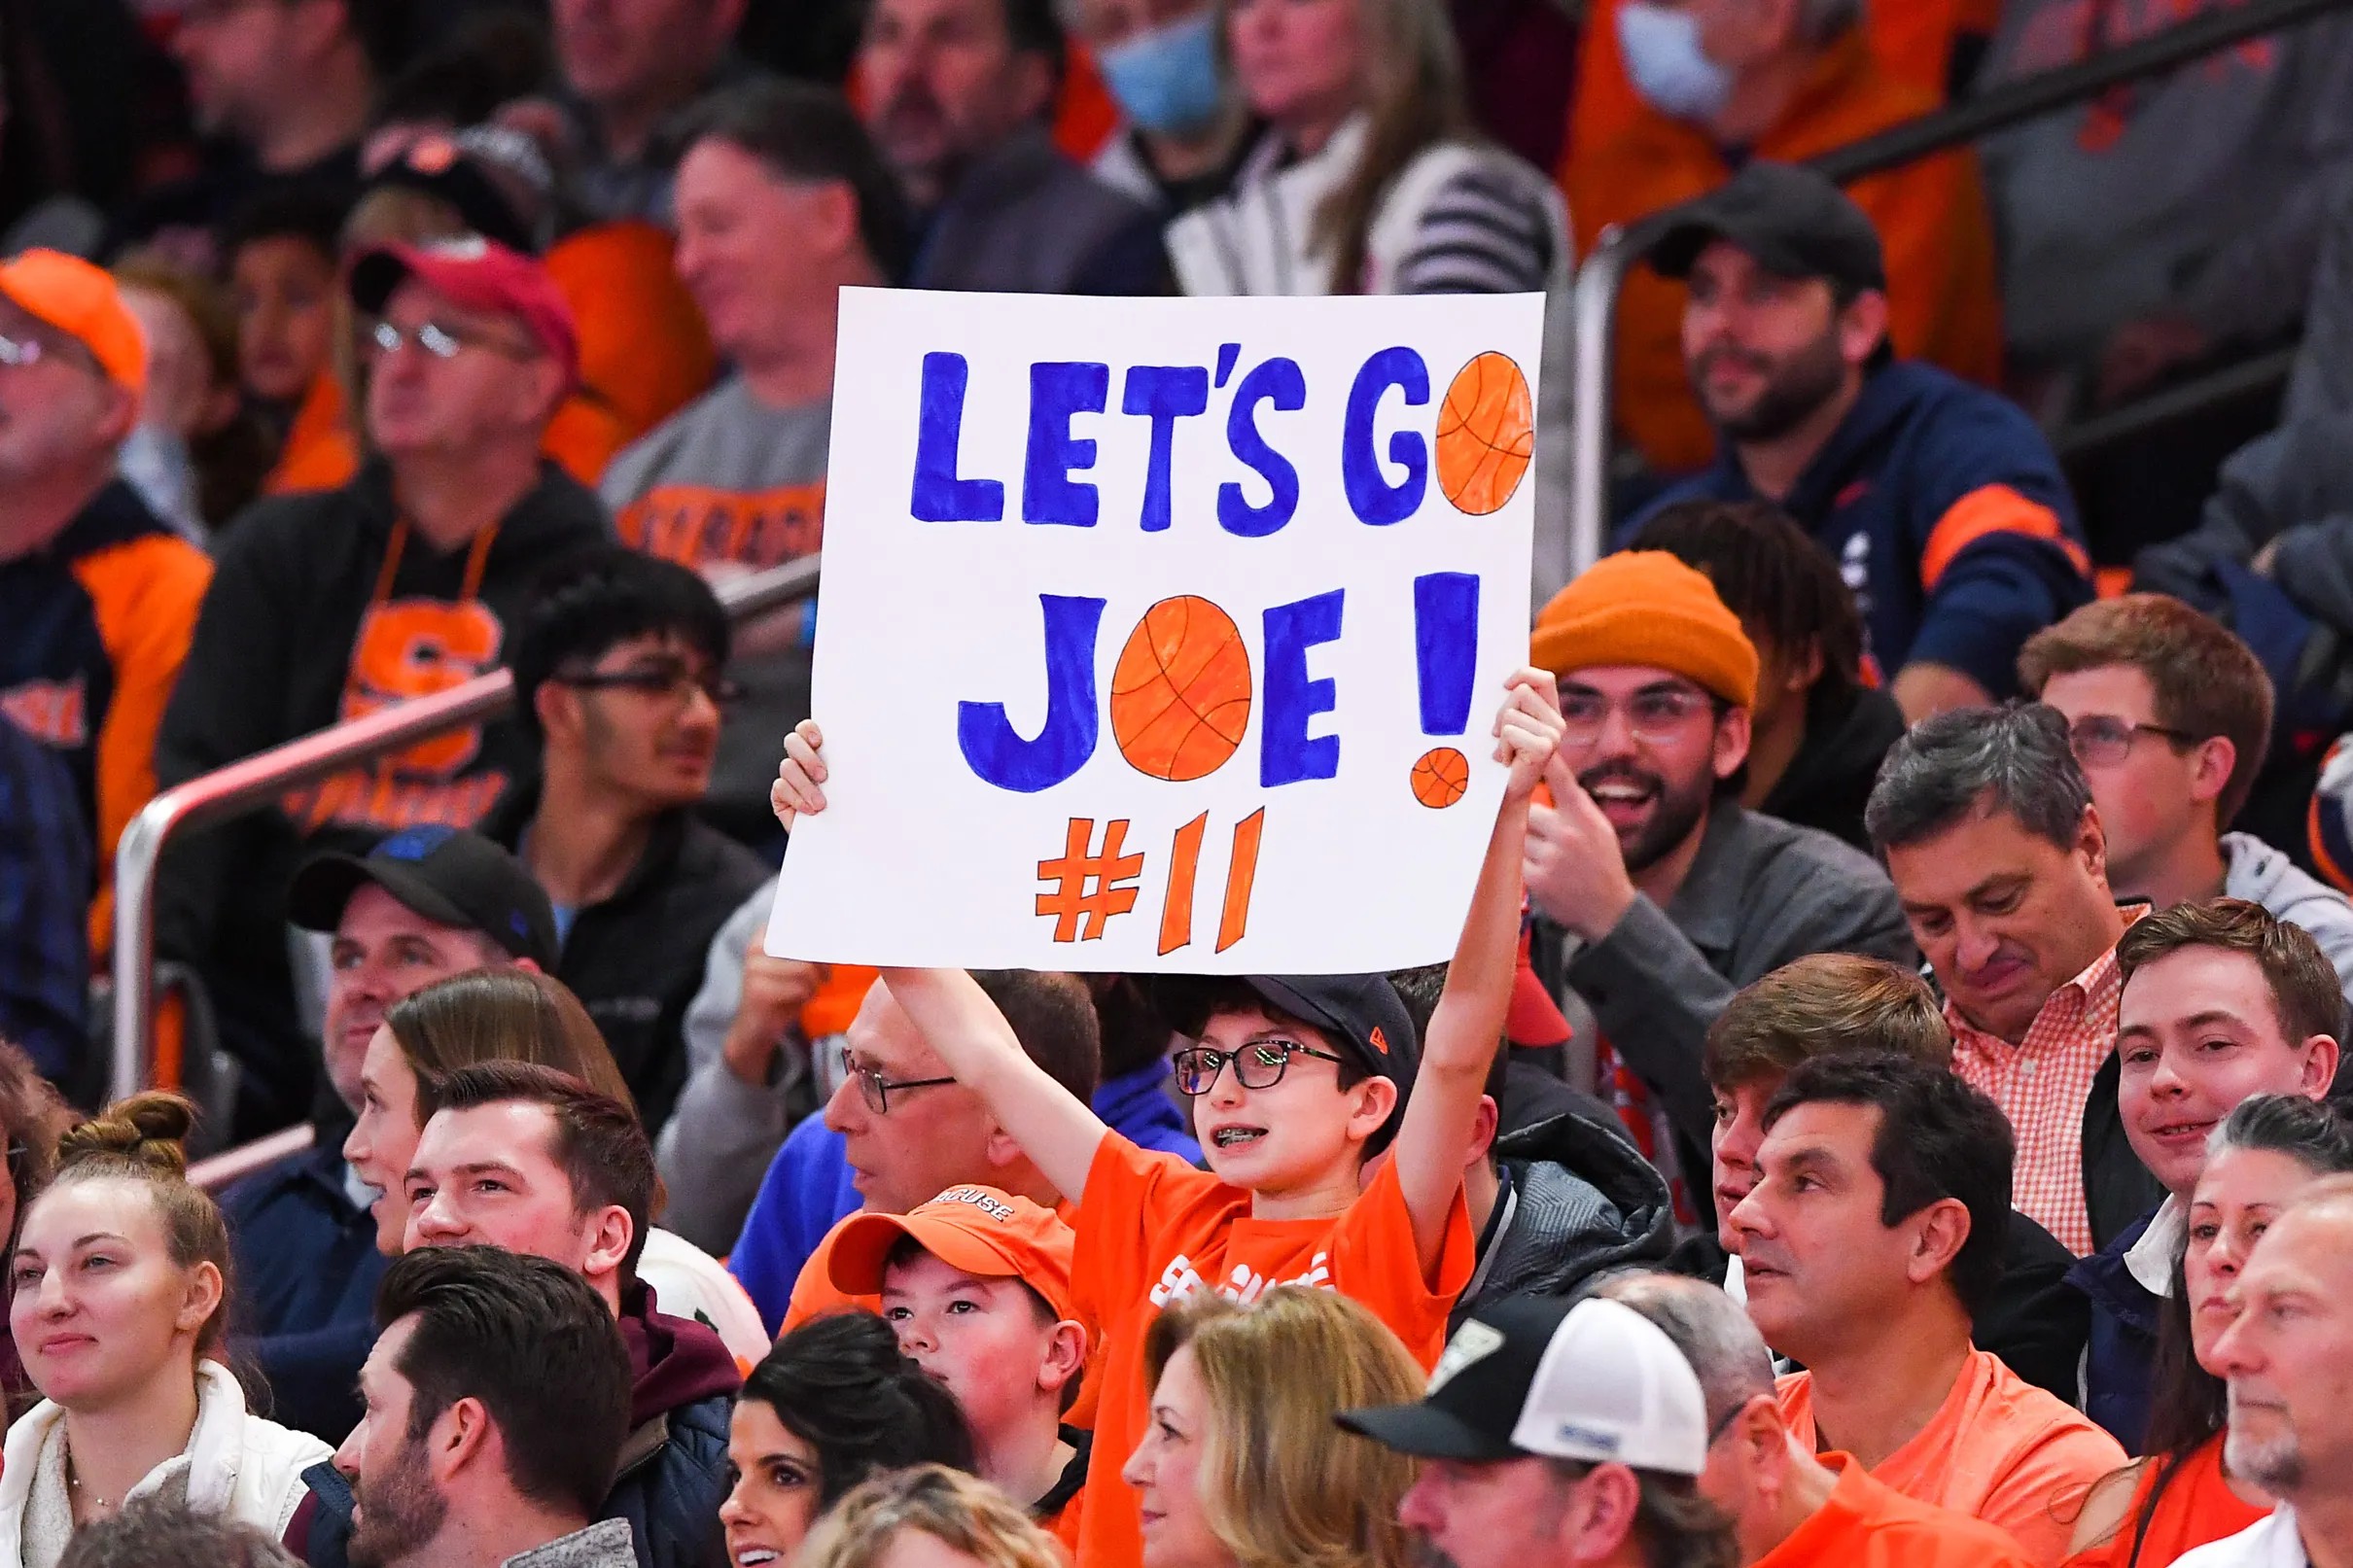 Syracuse reacts You told us that tonight’s Duke game is the highlight